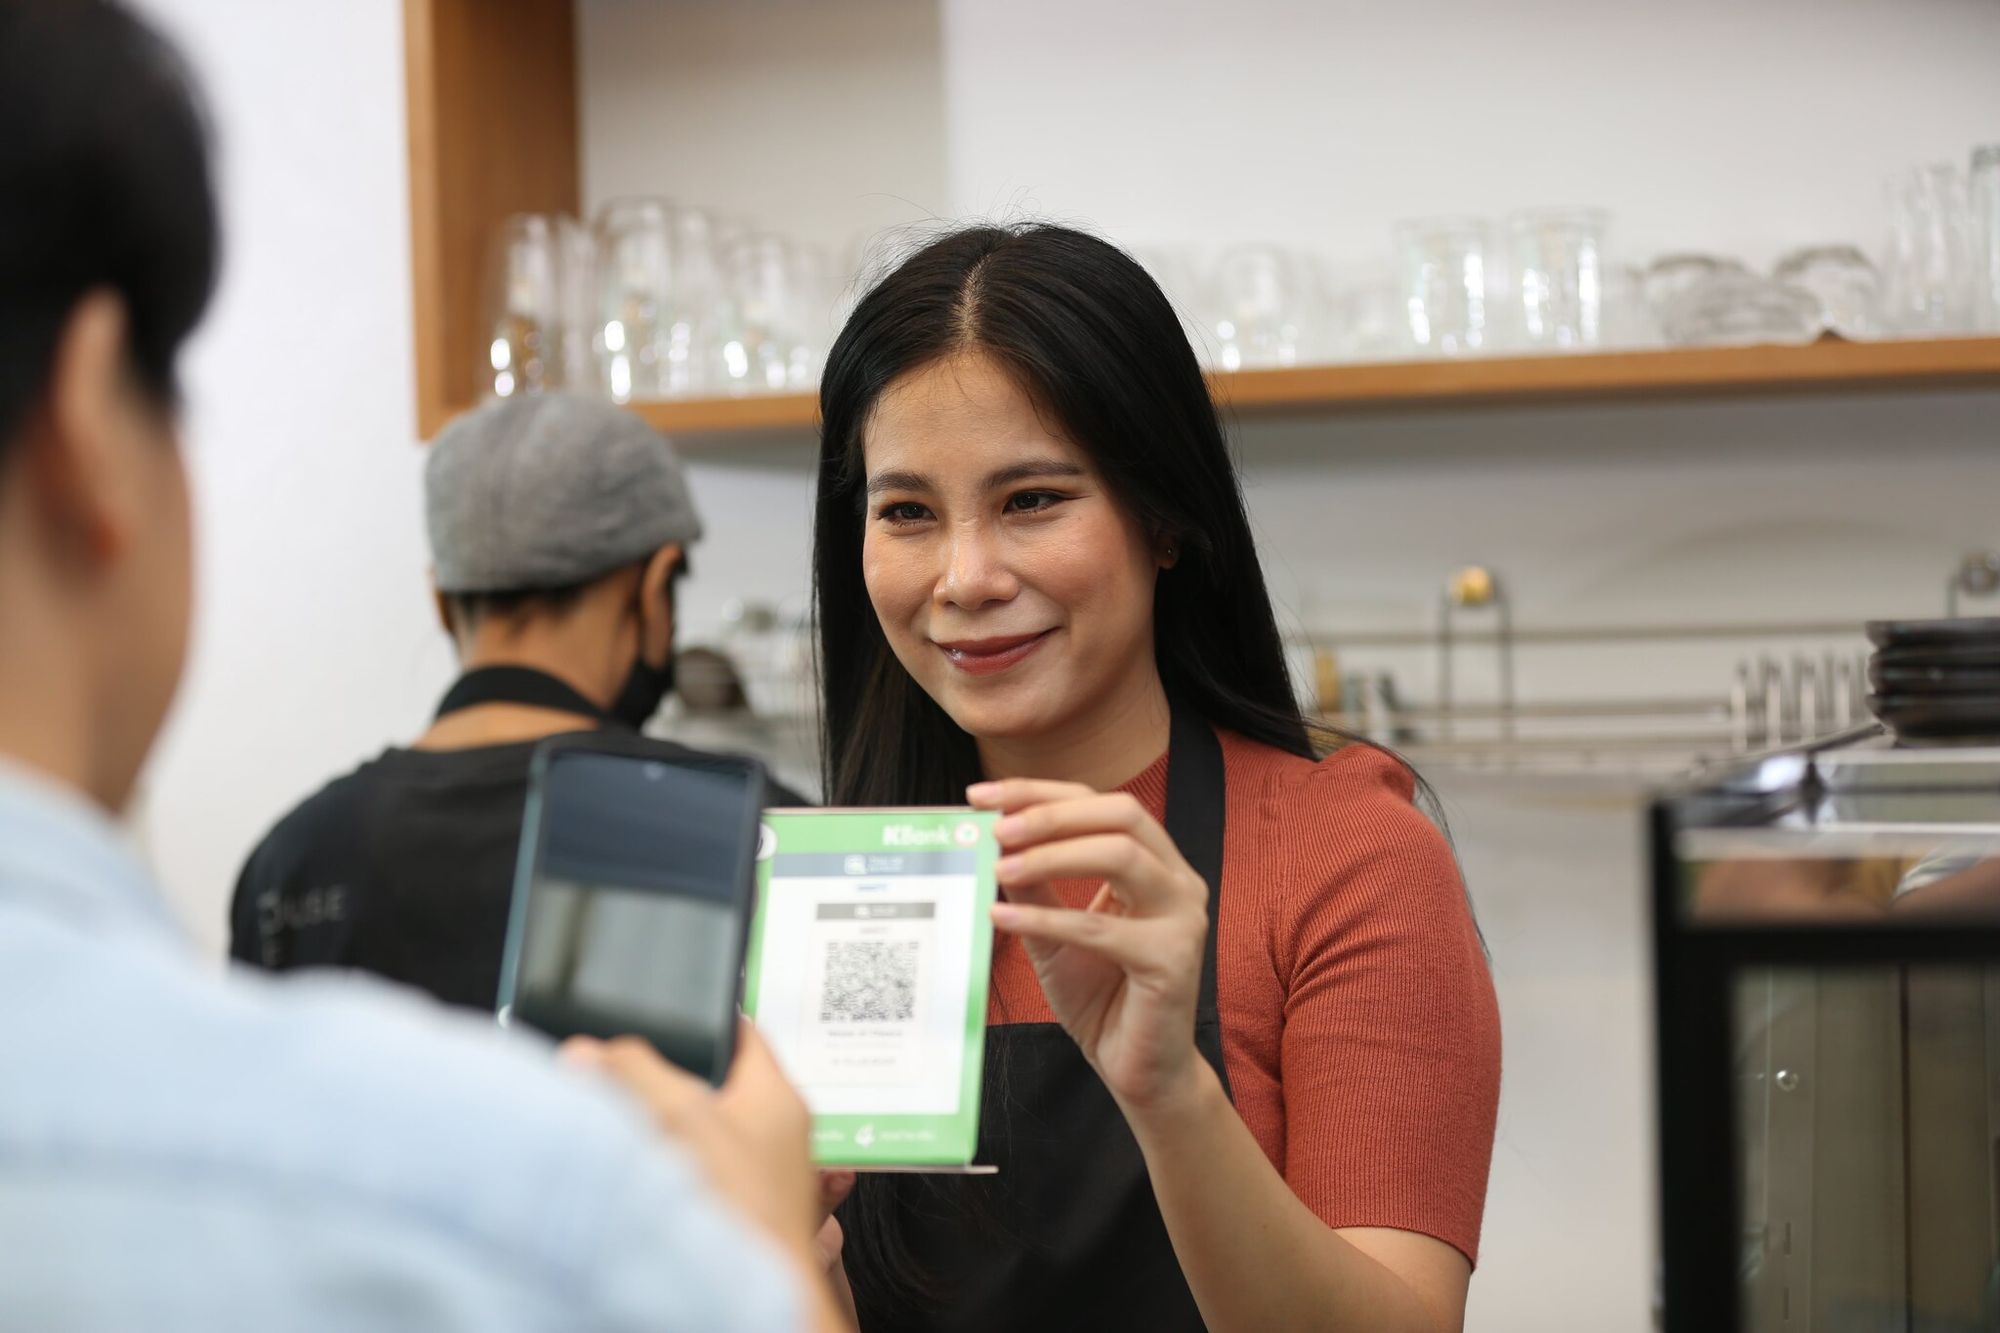 A man scanning a QR code and a woman smiling at a cafe